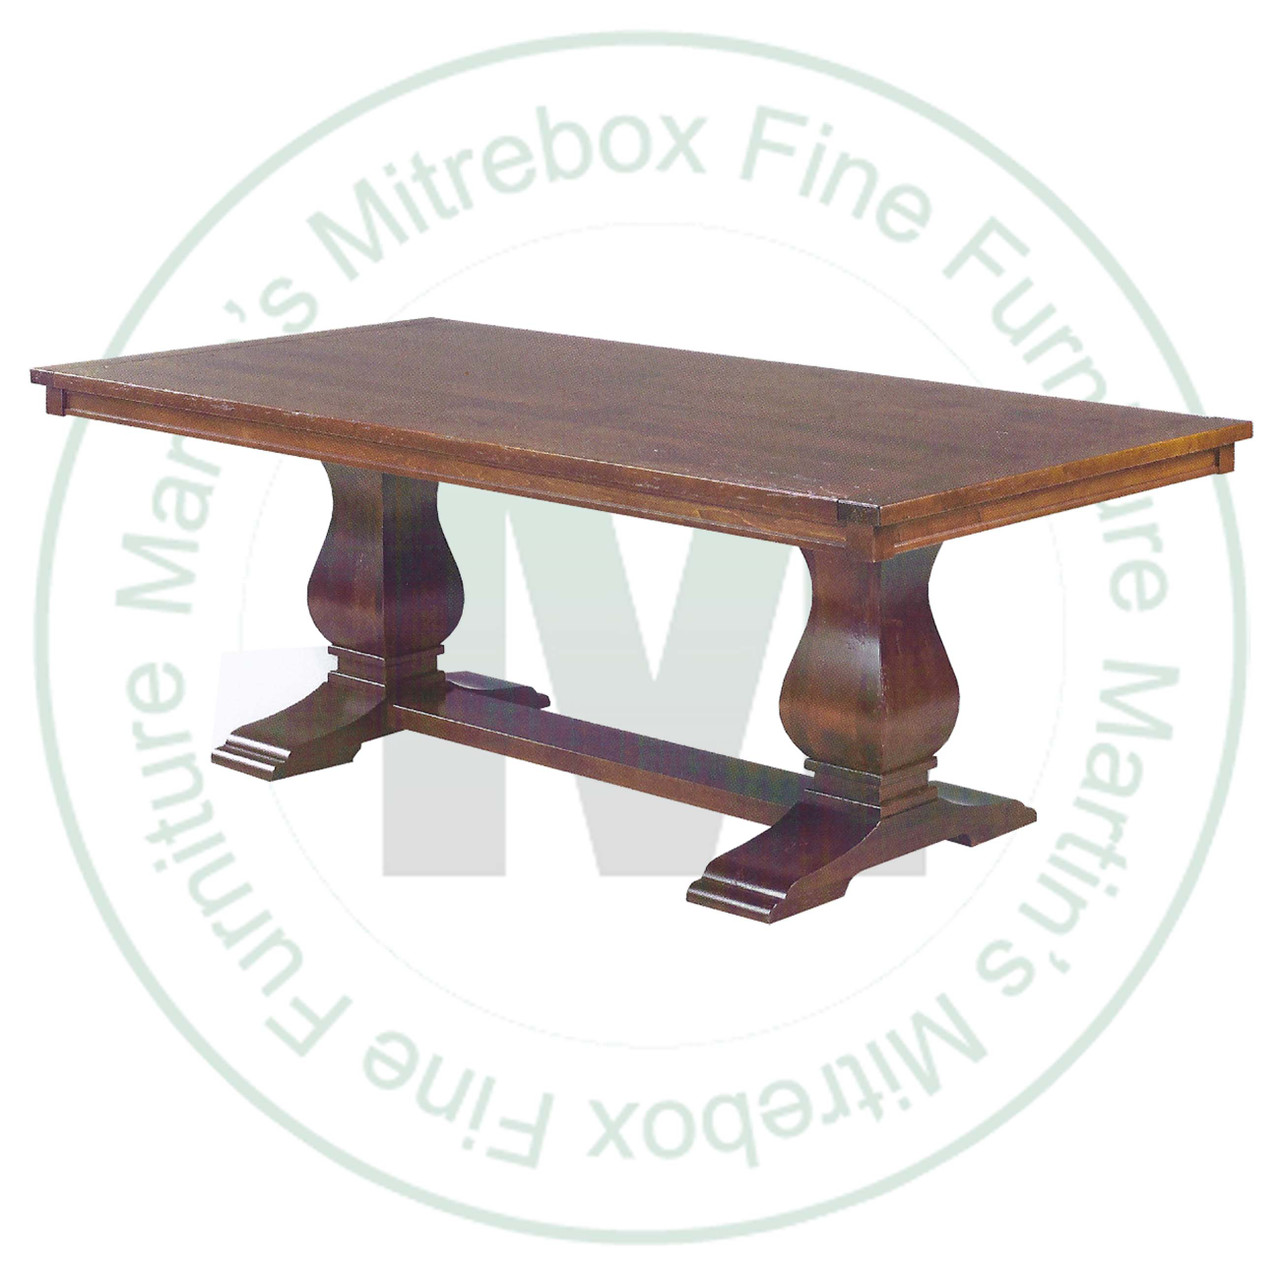 Oak Socrates Double Pedestal Table 48''D x 84''W x 30''H With 3 - 12'' Leaves. Table Has 1.25'' Thick Top